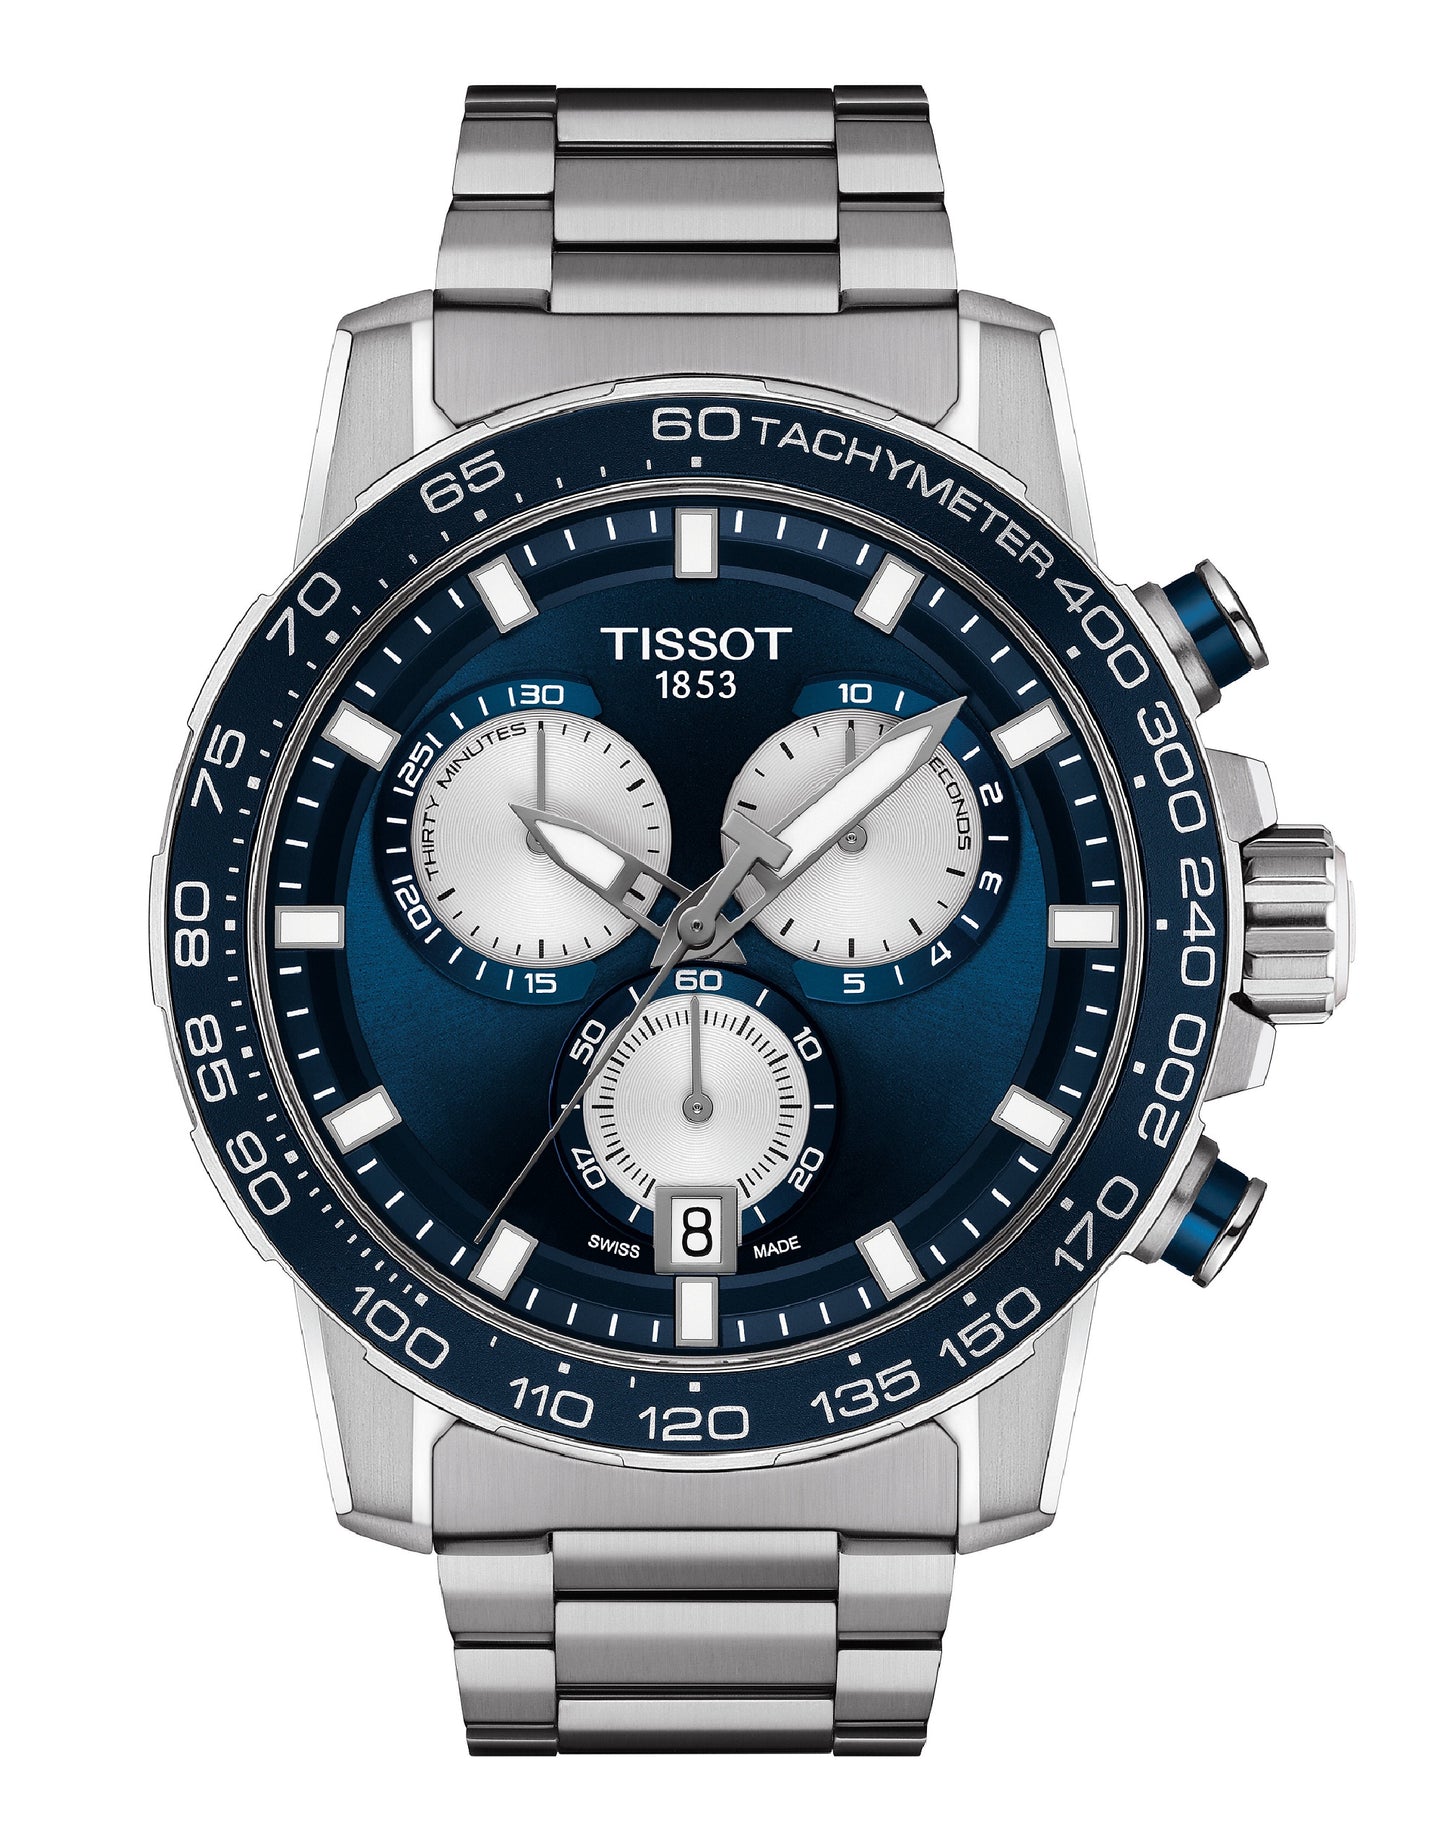 Tissot T125.617.11.041.00 Tissot SUPERSPORT CHRONO Blue Dial Indexes Watch